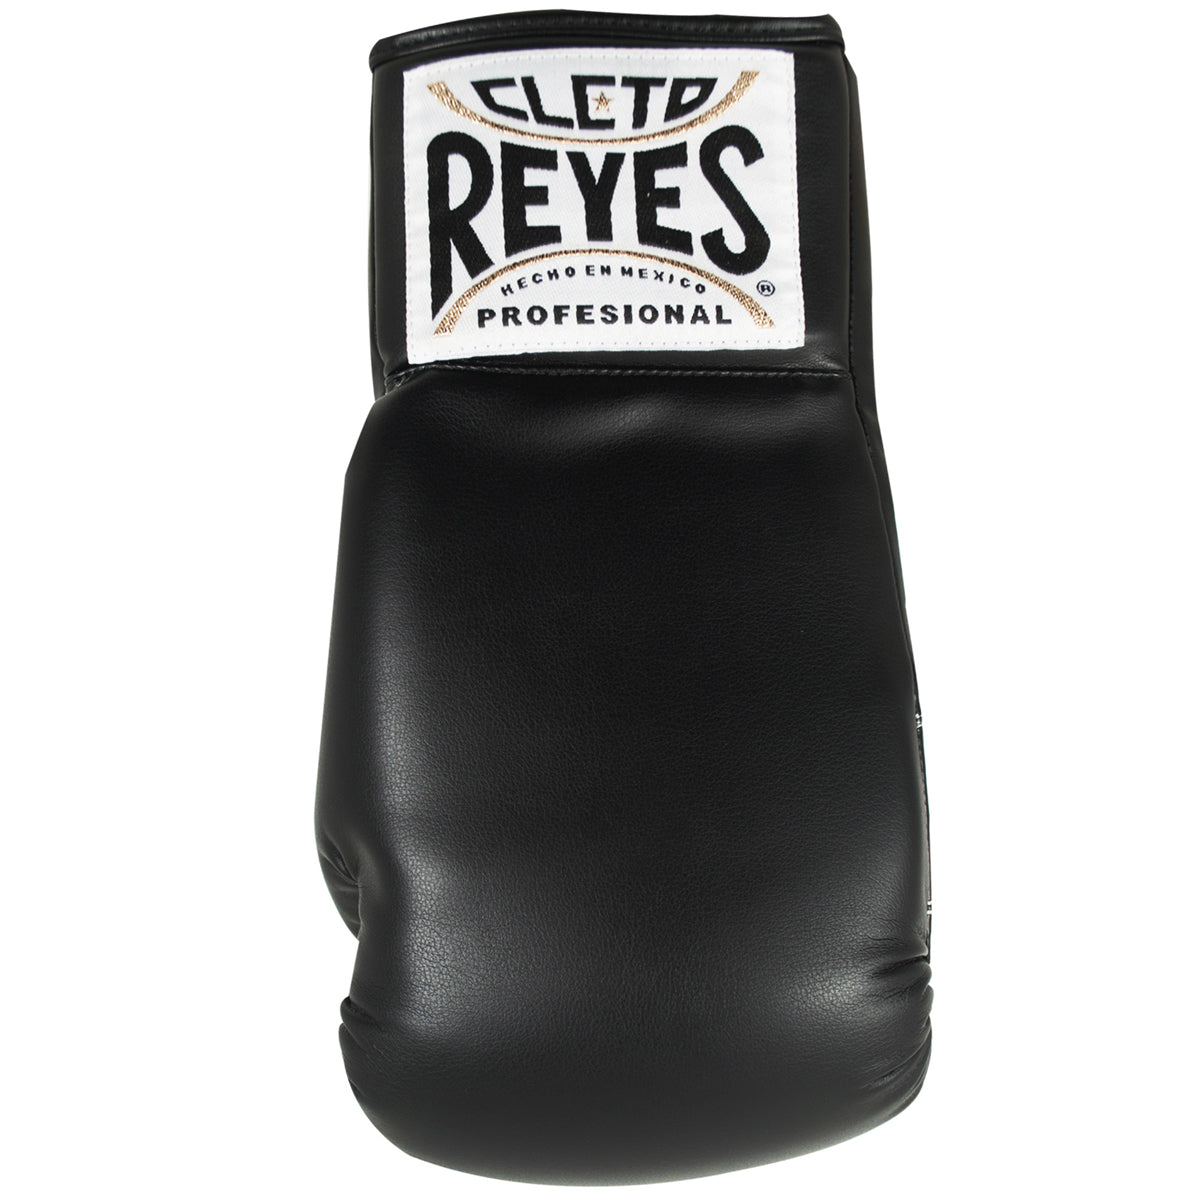 Cleto Reyes Standard Collectible Autograph Boxing Glove Cleto Reyes